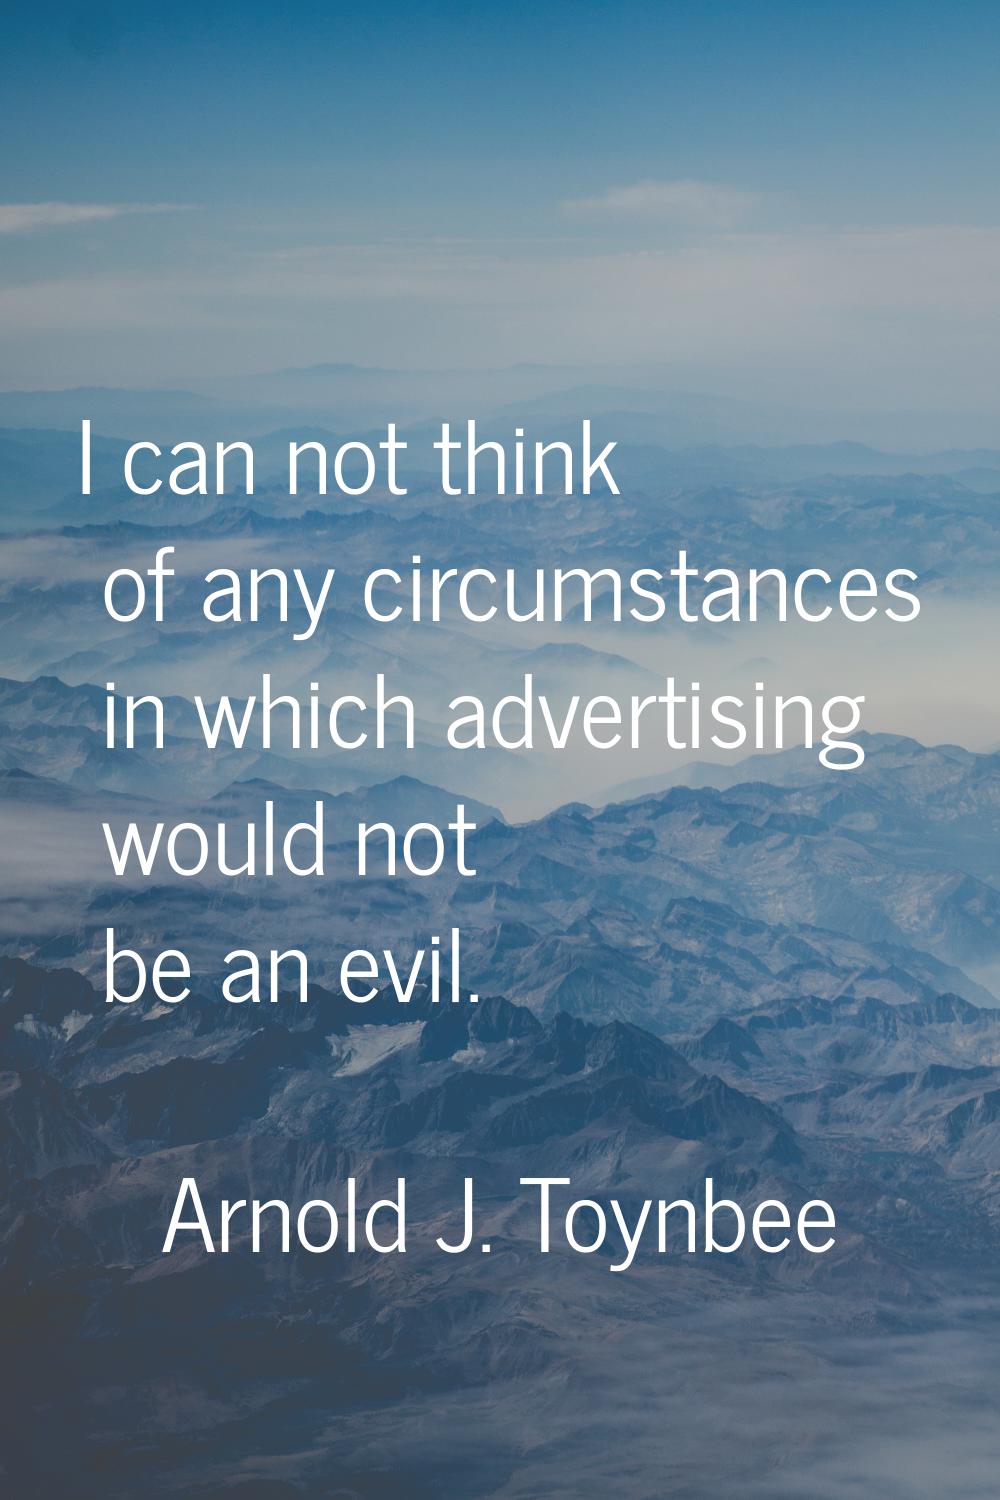 I can not think of any circumstances in which advertising would not be an evil.